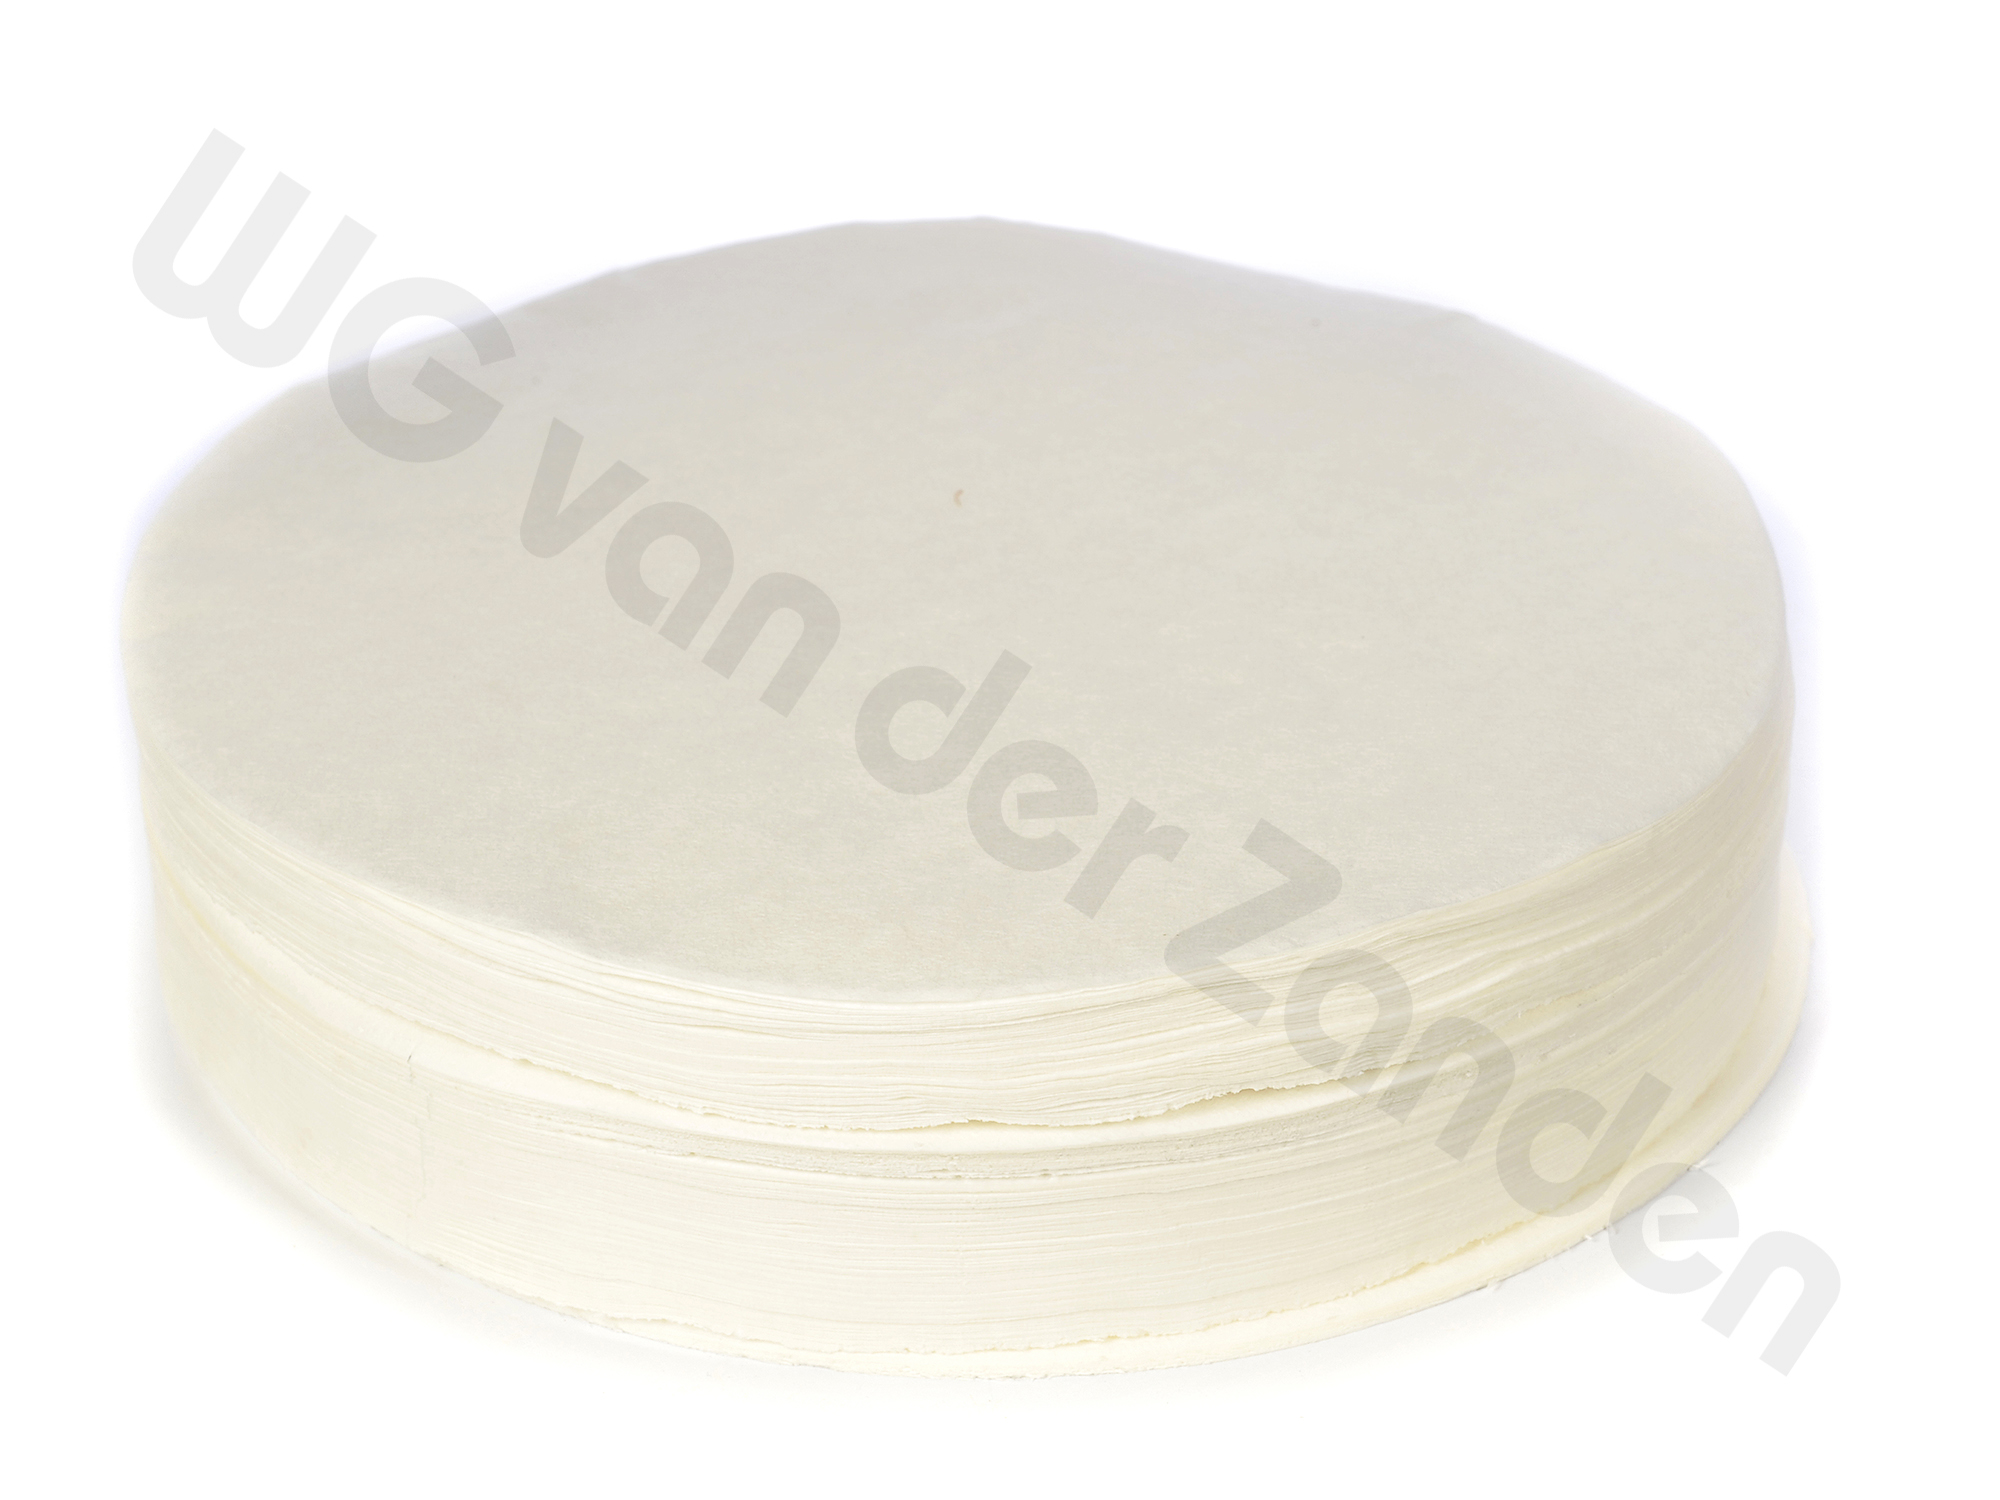 669790 KOFFIEFILTERS ROND B20 330MMØ